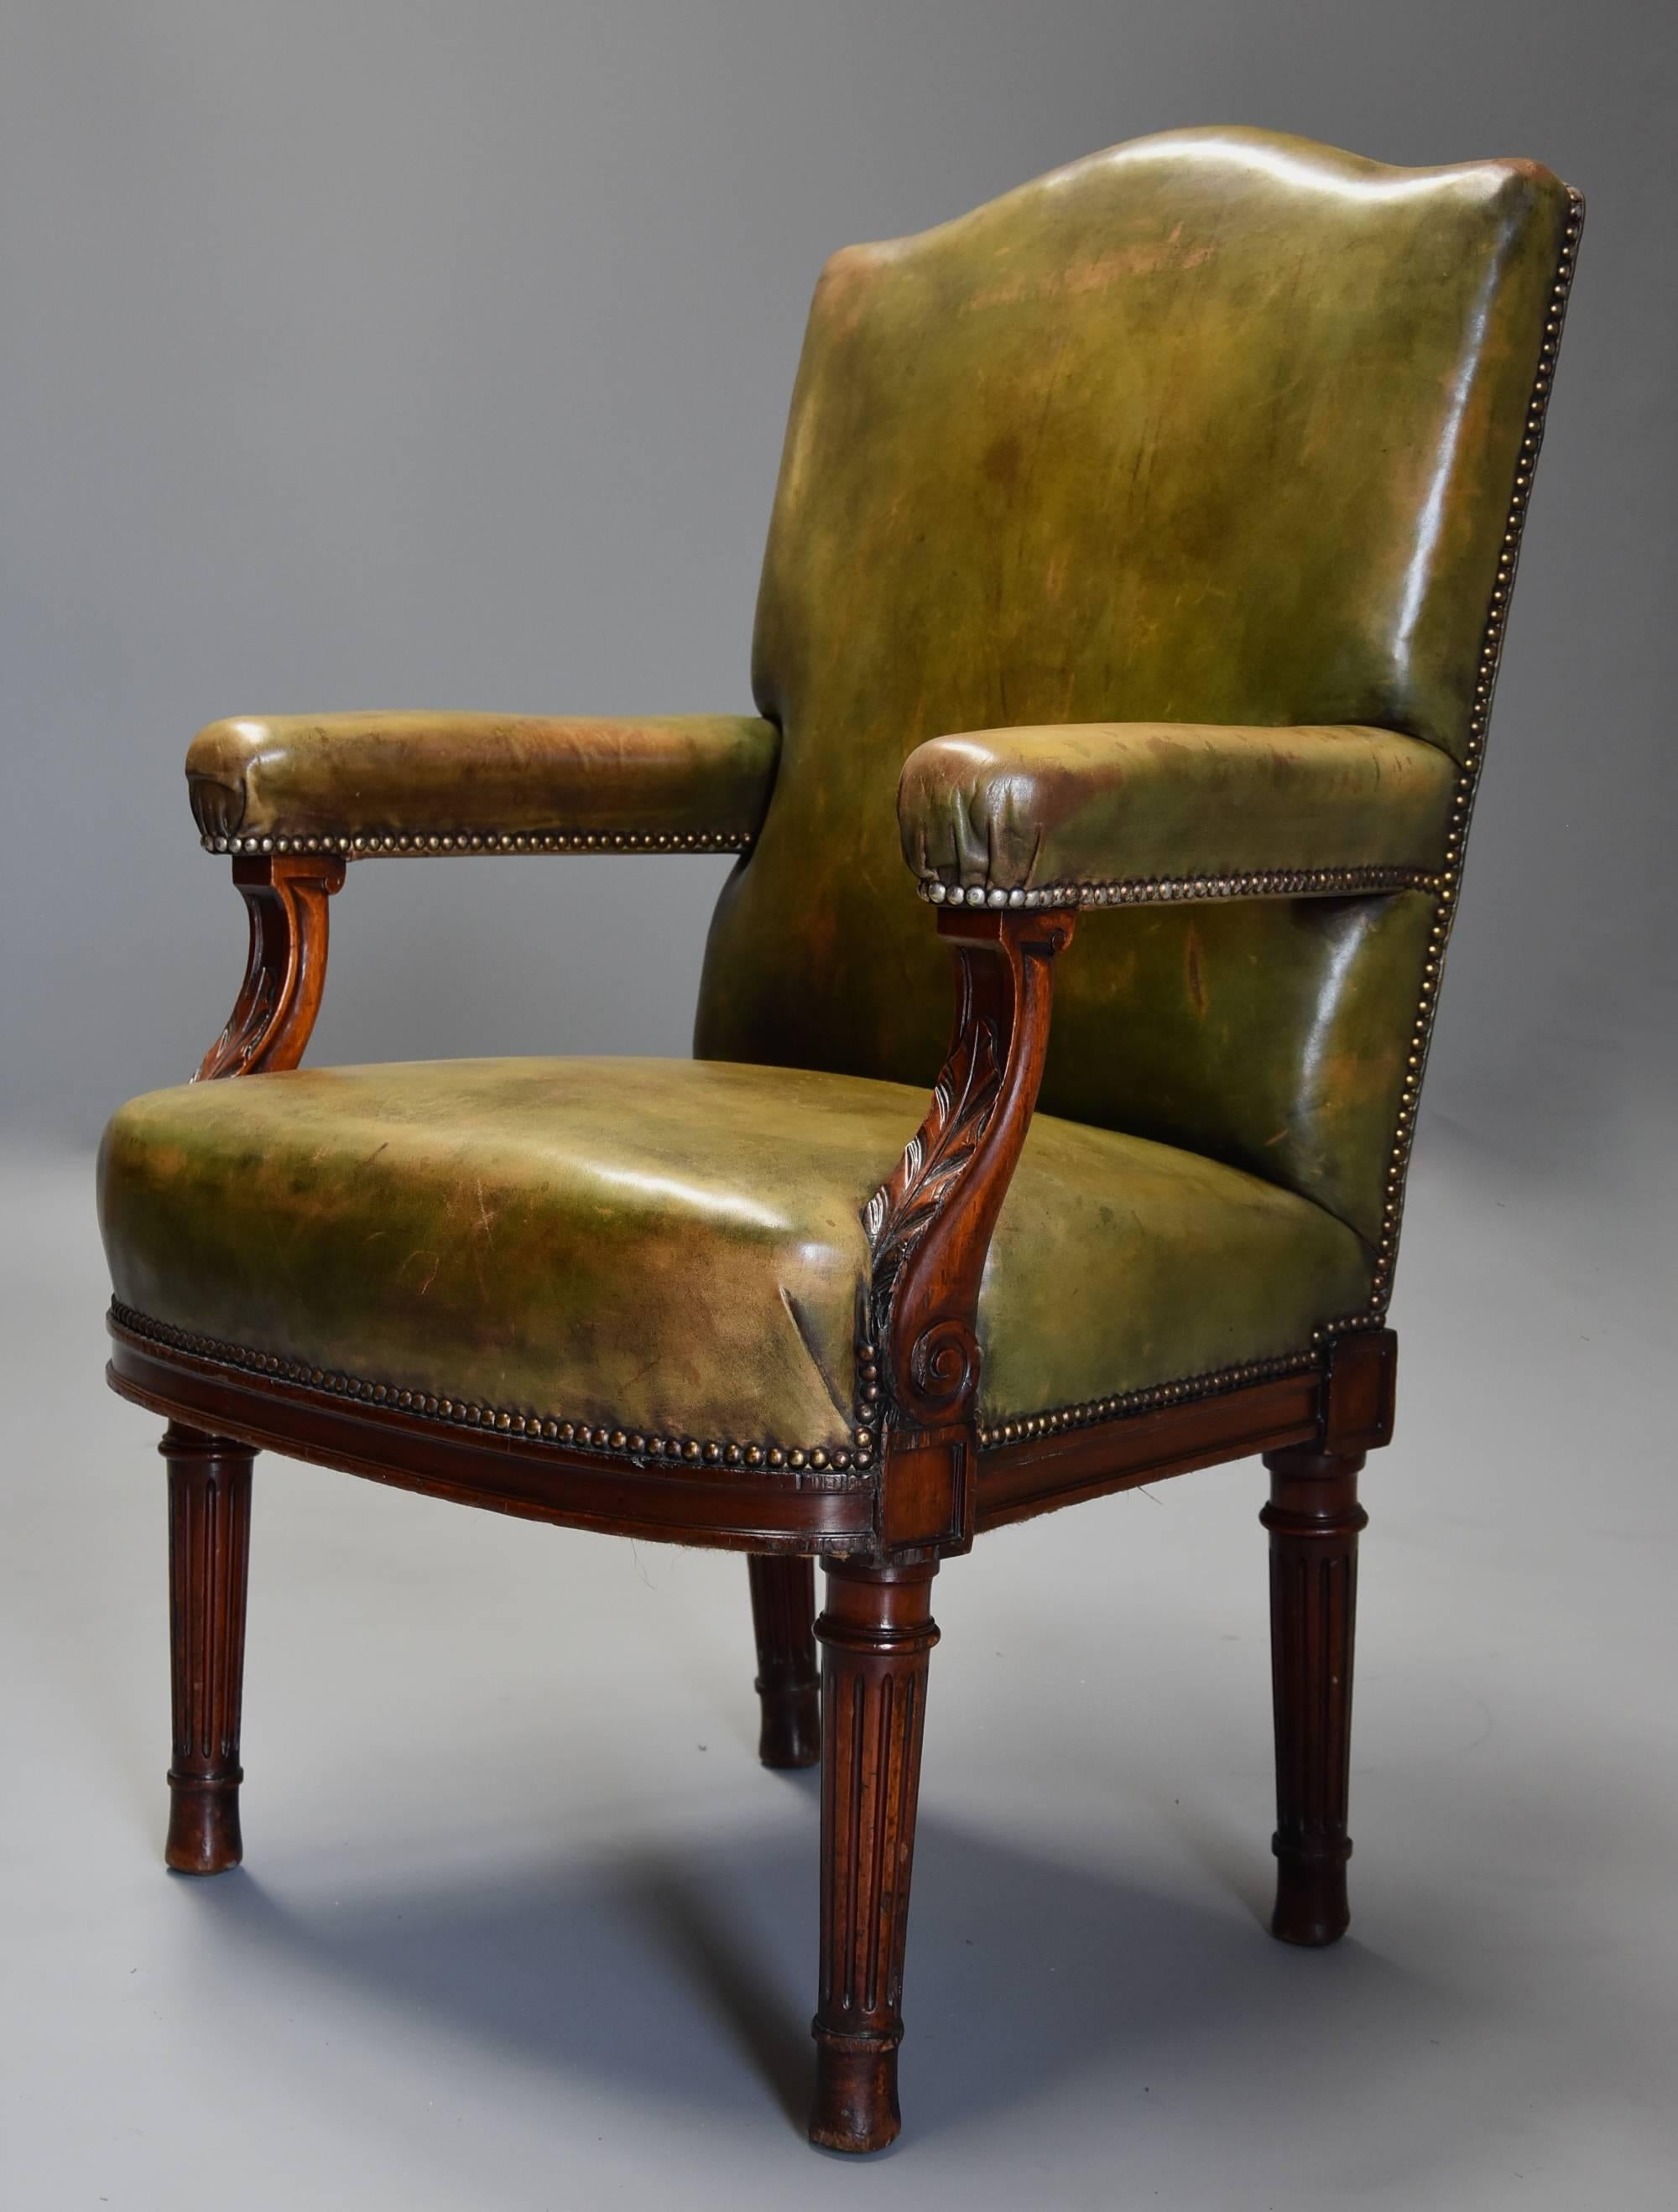 A late 19th century mahogany open armchair upholstered in a mottled green leather.

This chairs consists of a shaped top rail with an upholstered leather back, seat and arms, the arm supports being shaped and carved with leaf decoration.

This